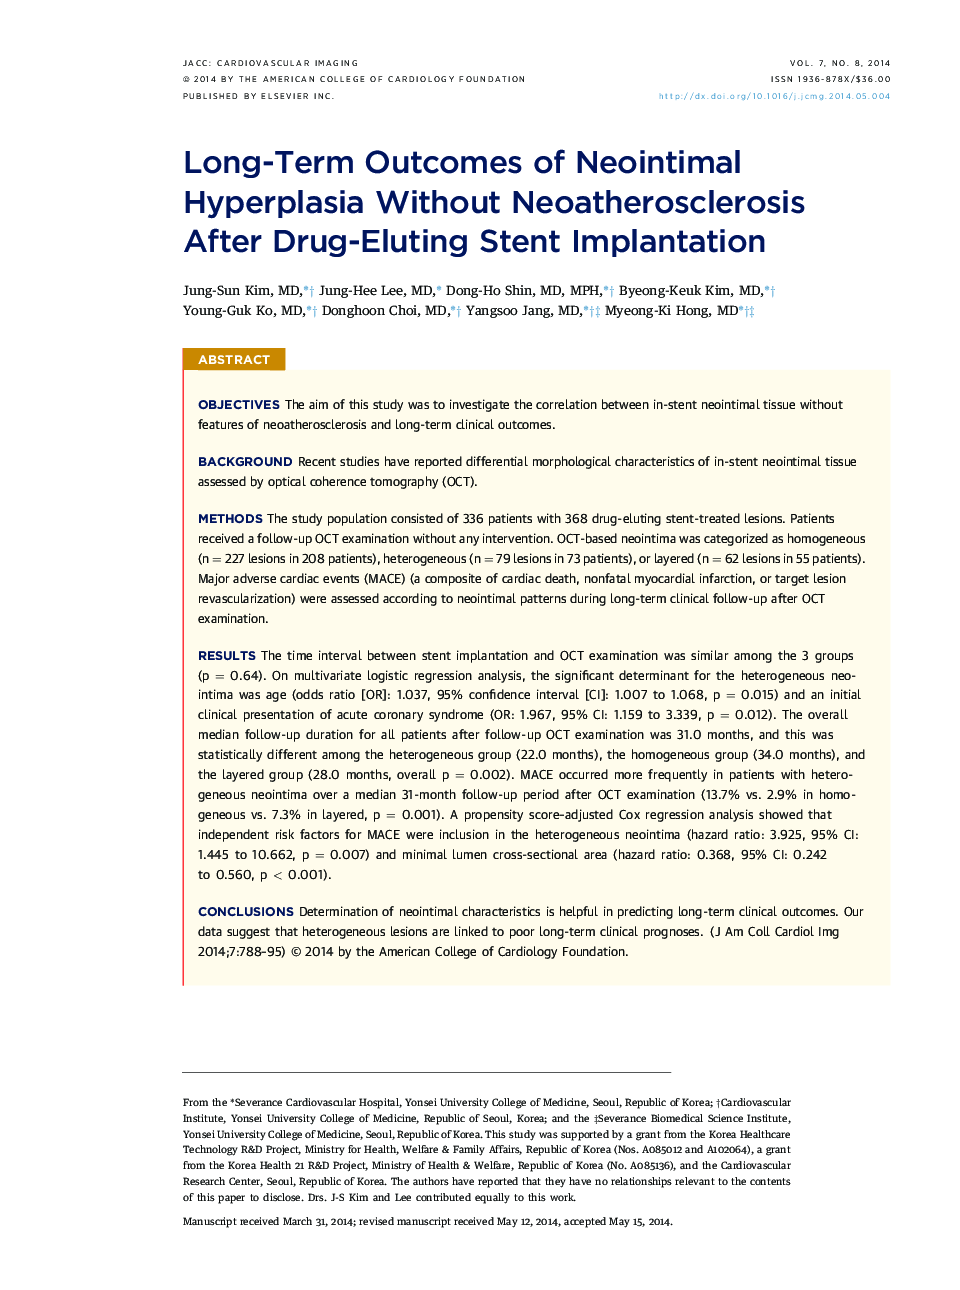 Long-Term Outcomes of Neointimal Hyperplasia Without Neoatherosclerosis After Drug-Eluting Stent Implantation